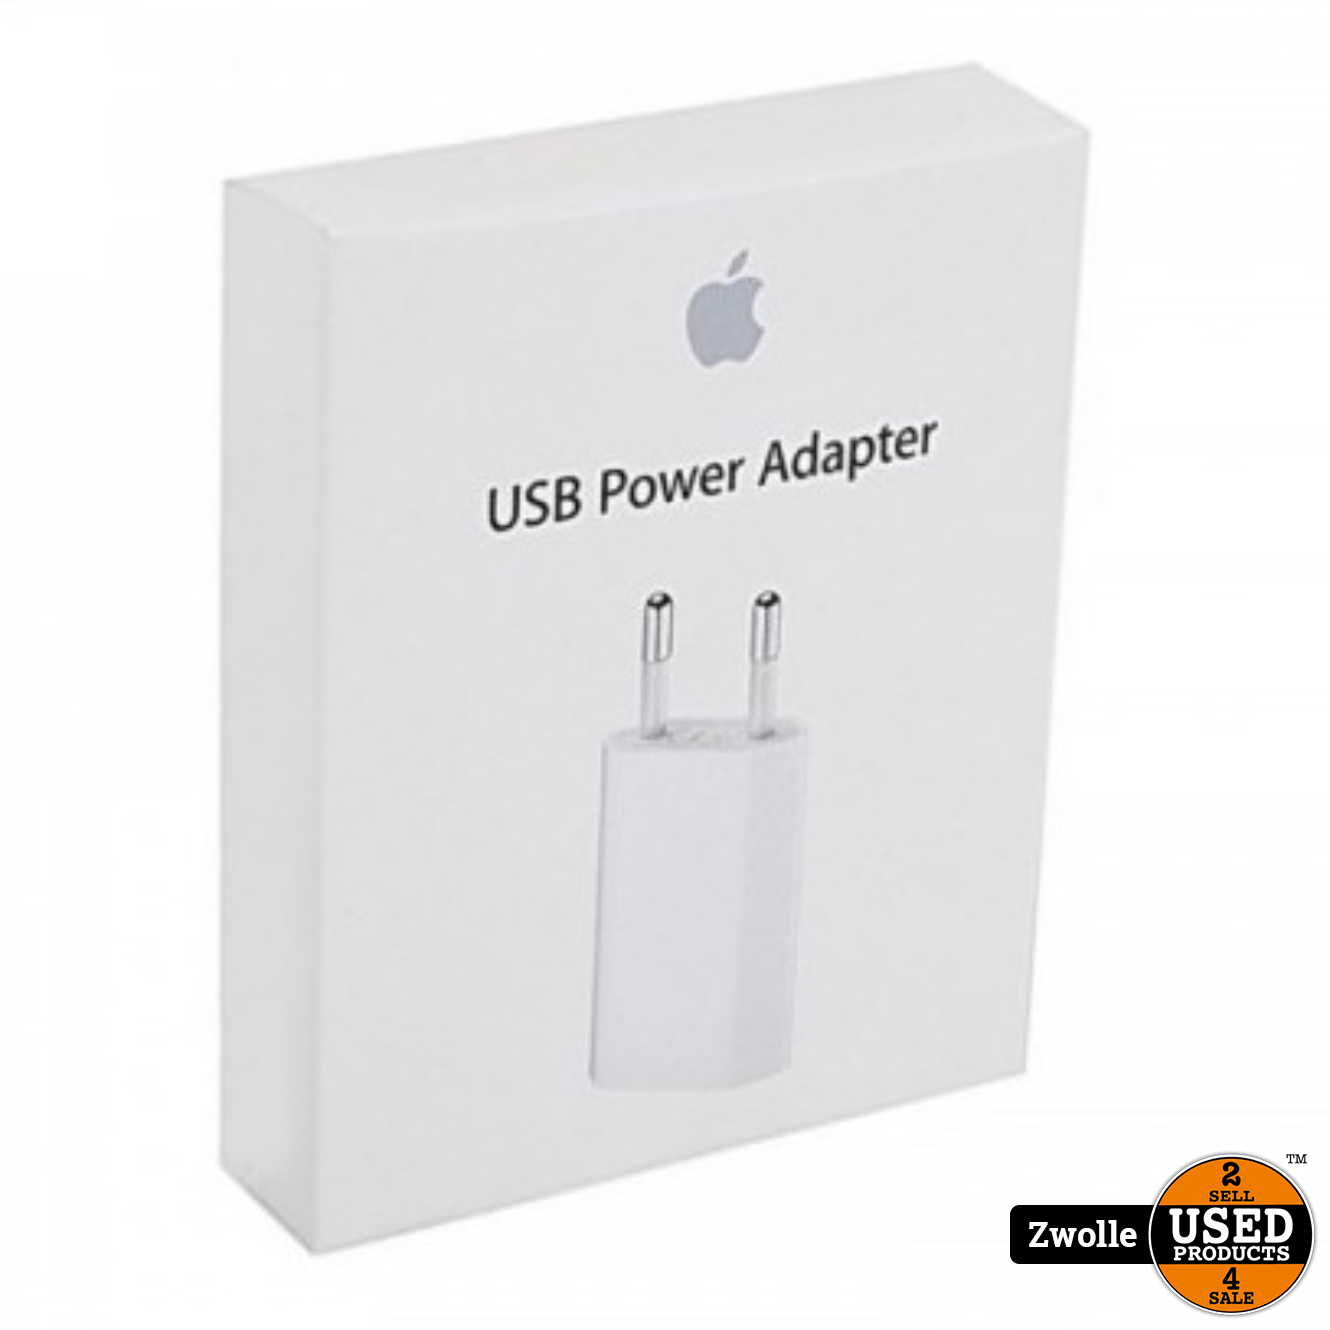 Inheems Koreaans materiaal Apple iPhone USB Power Adapter 5W - Used Products Zwolle